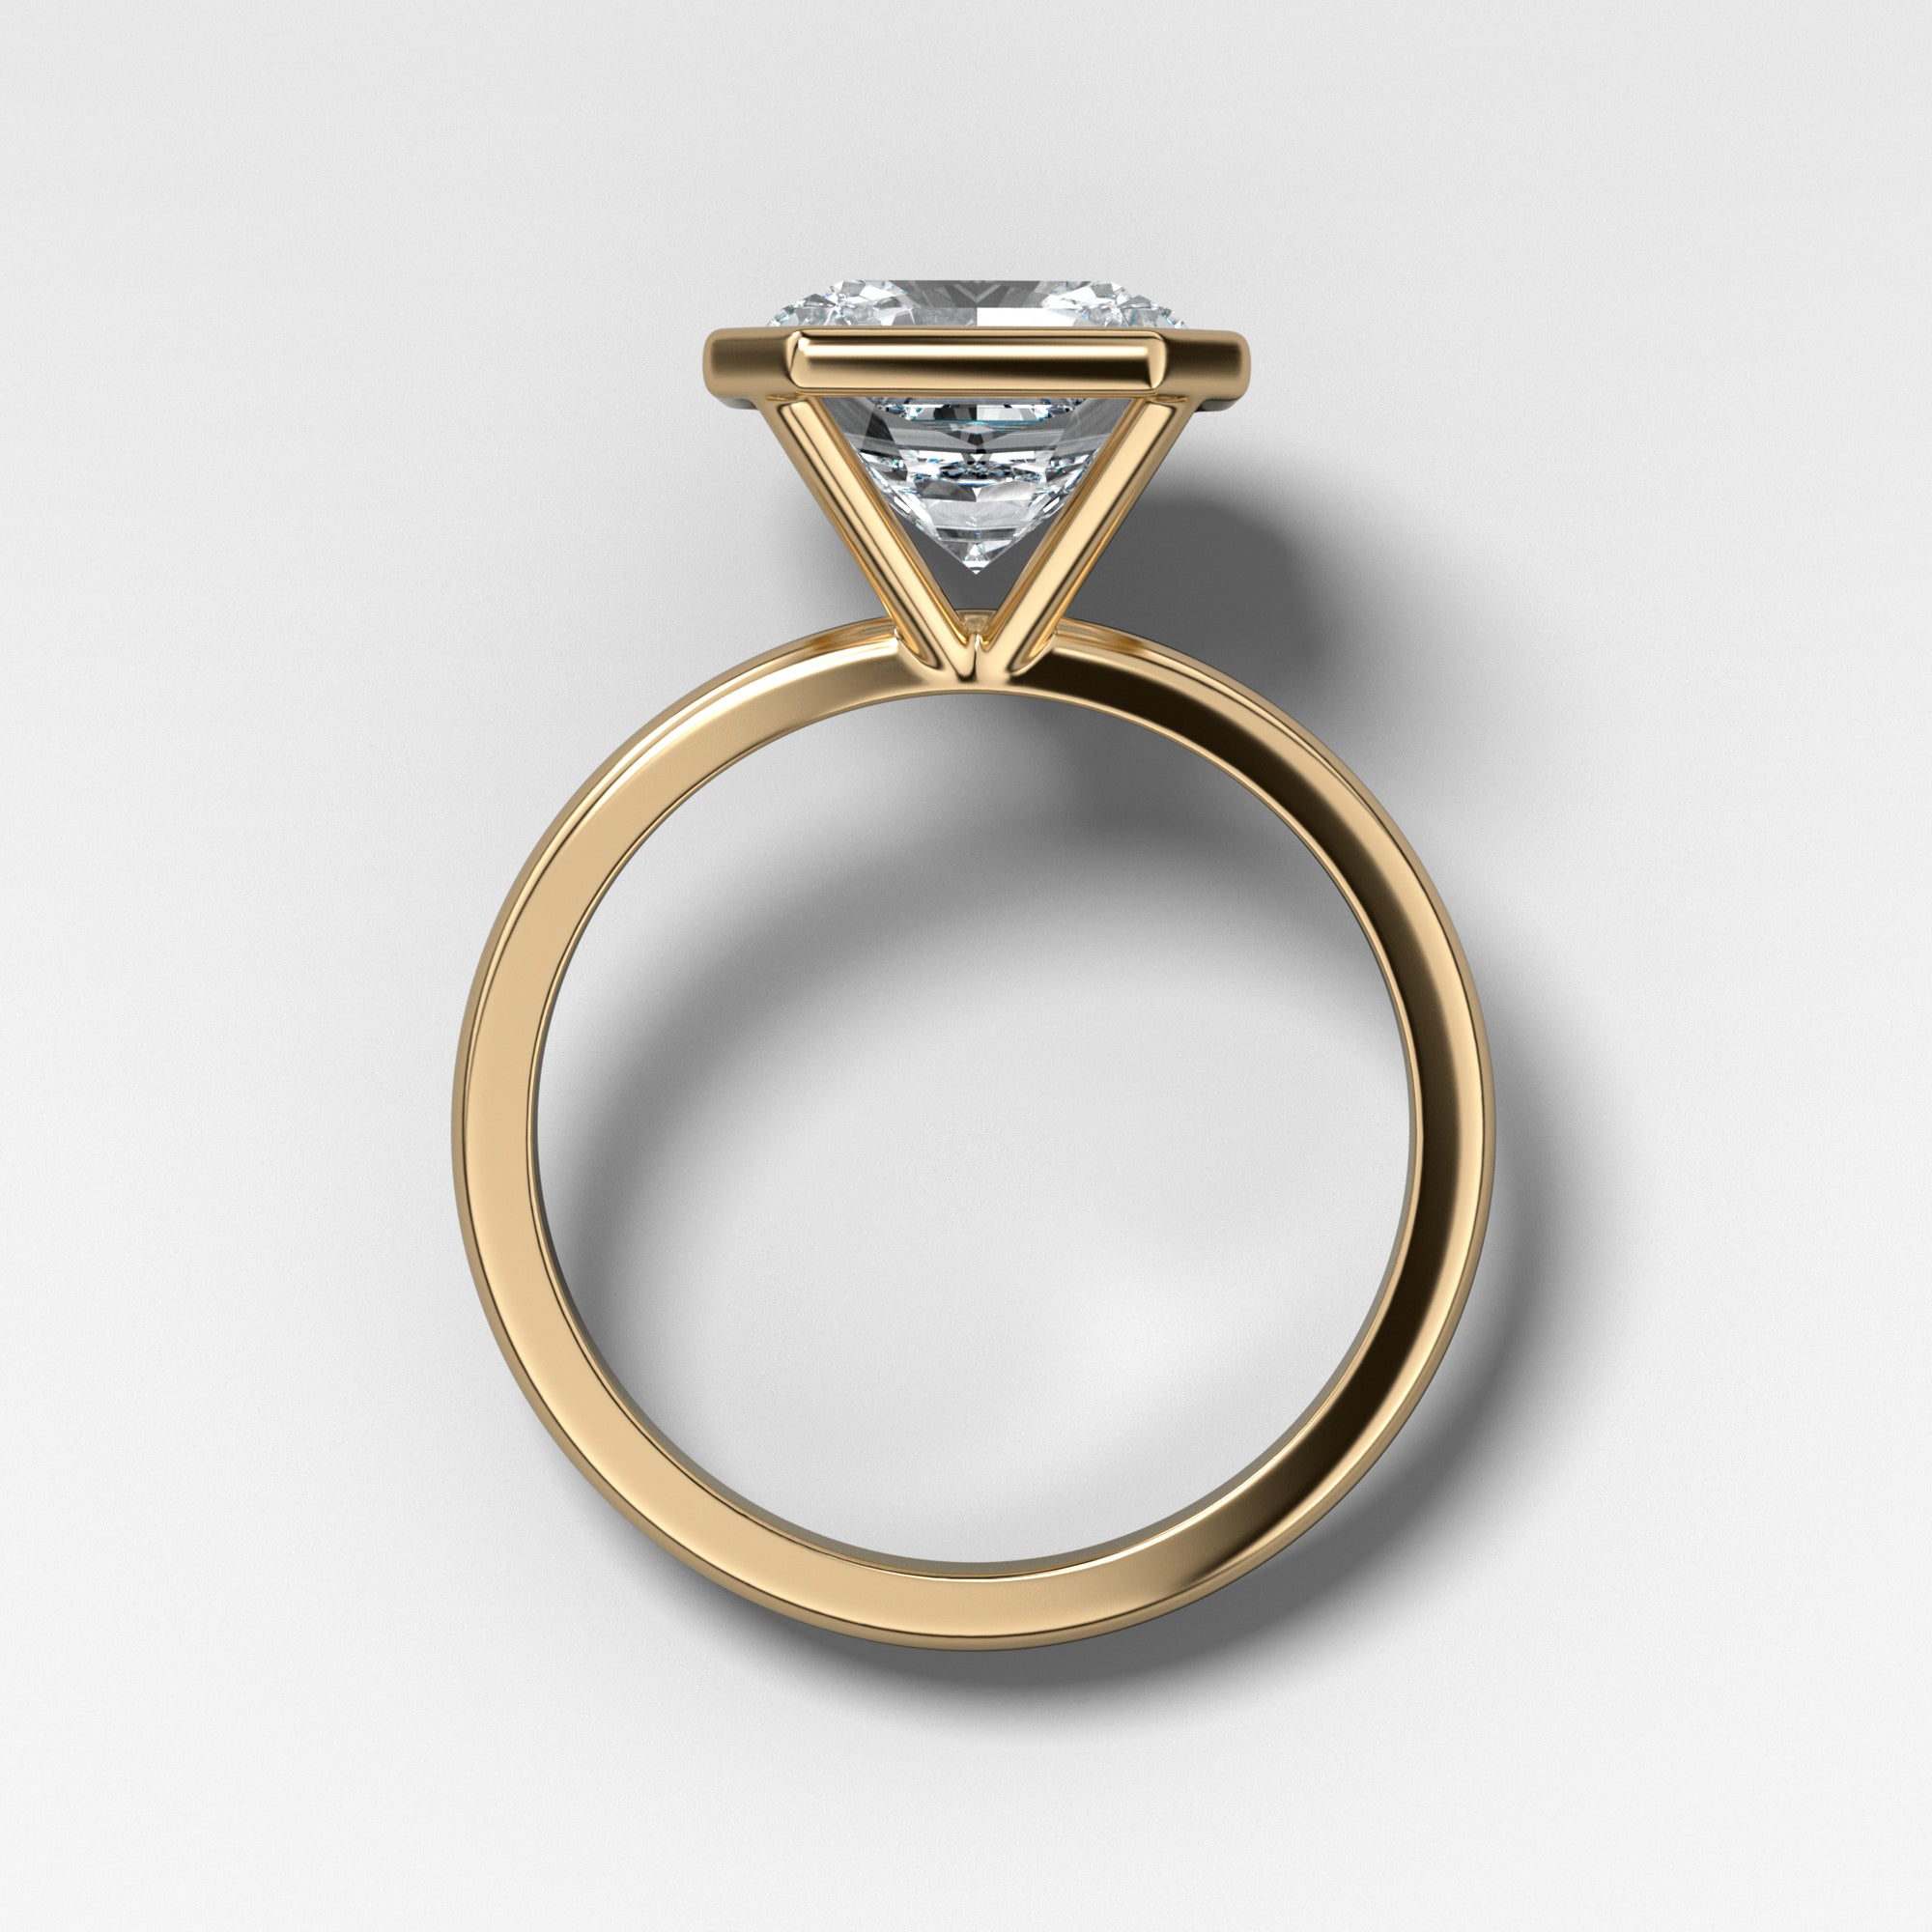 Bezel Penumbra Solitaire With Radiant Square Cut by Good Stone in Yellow Gold